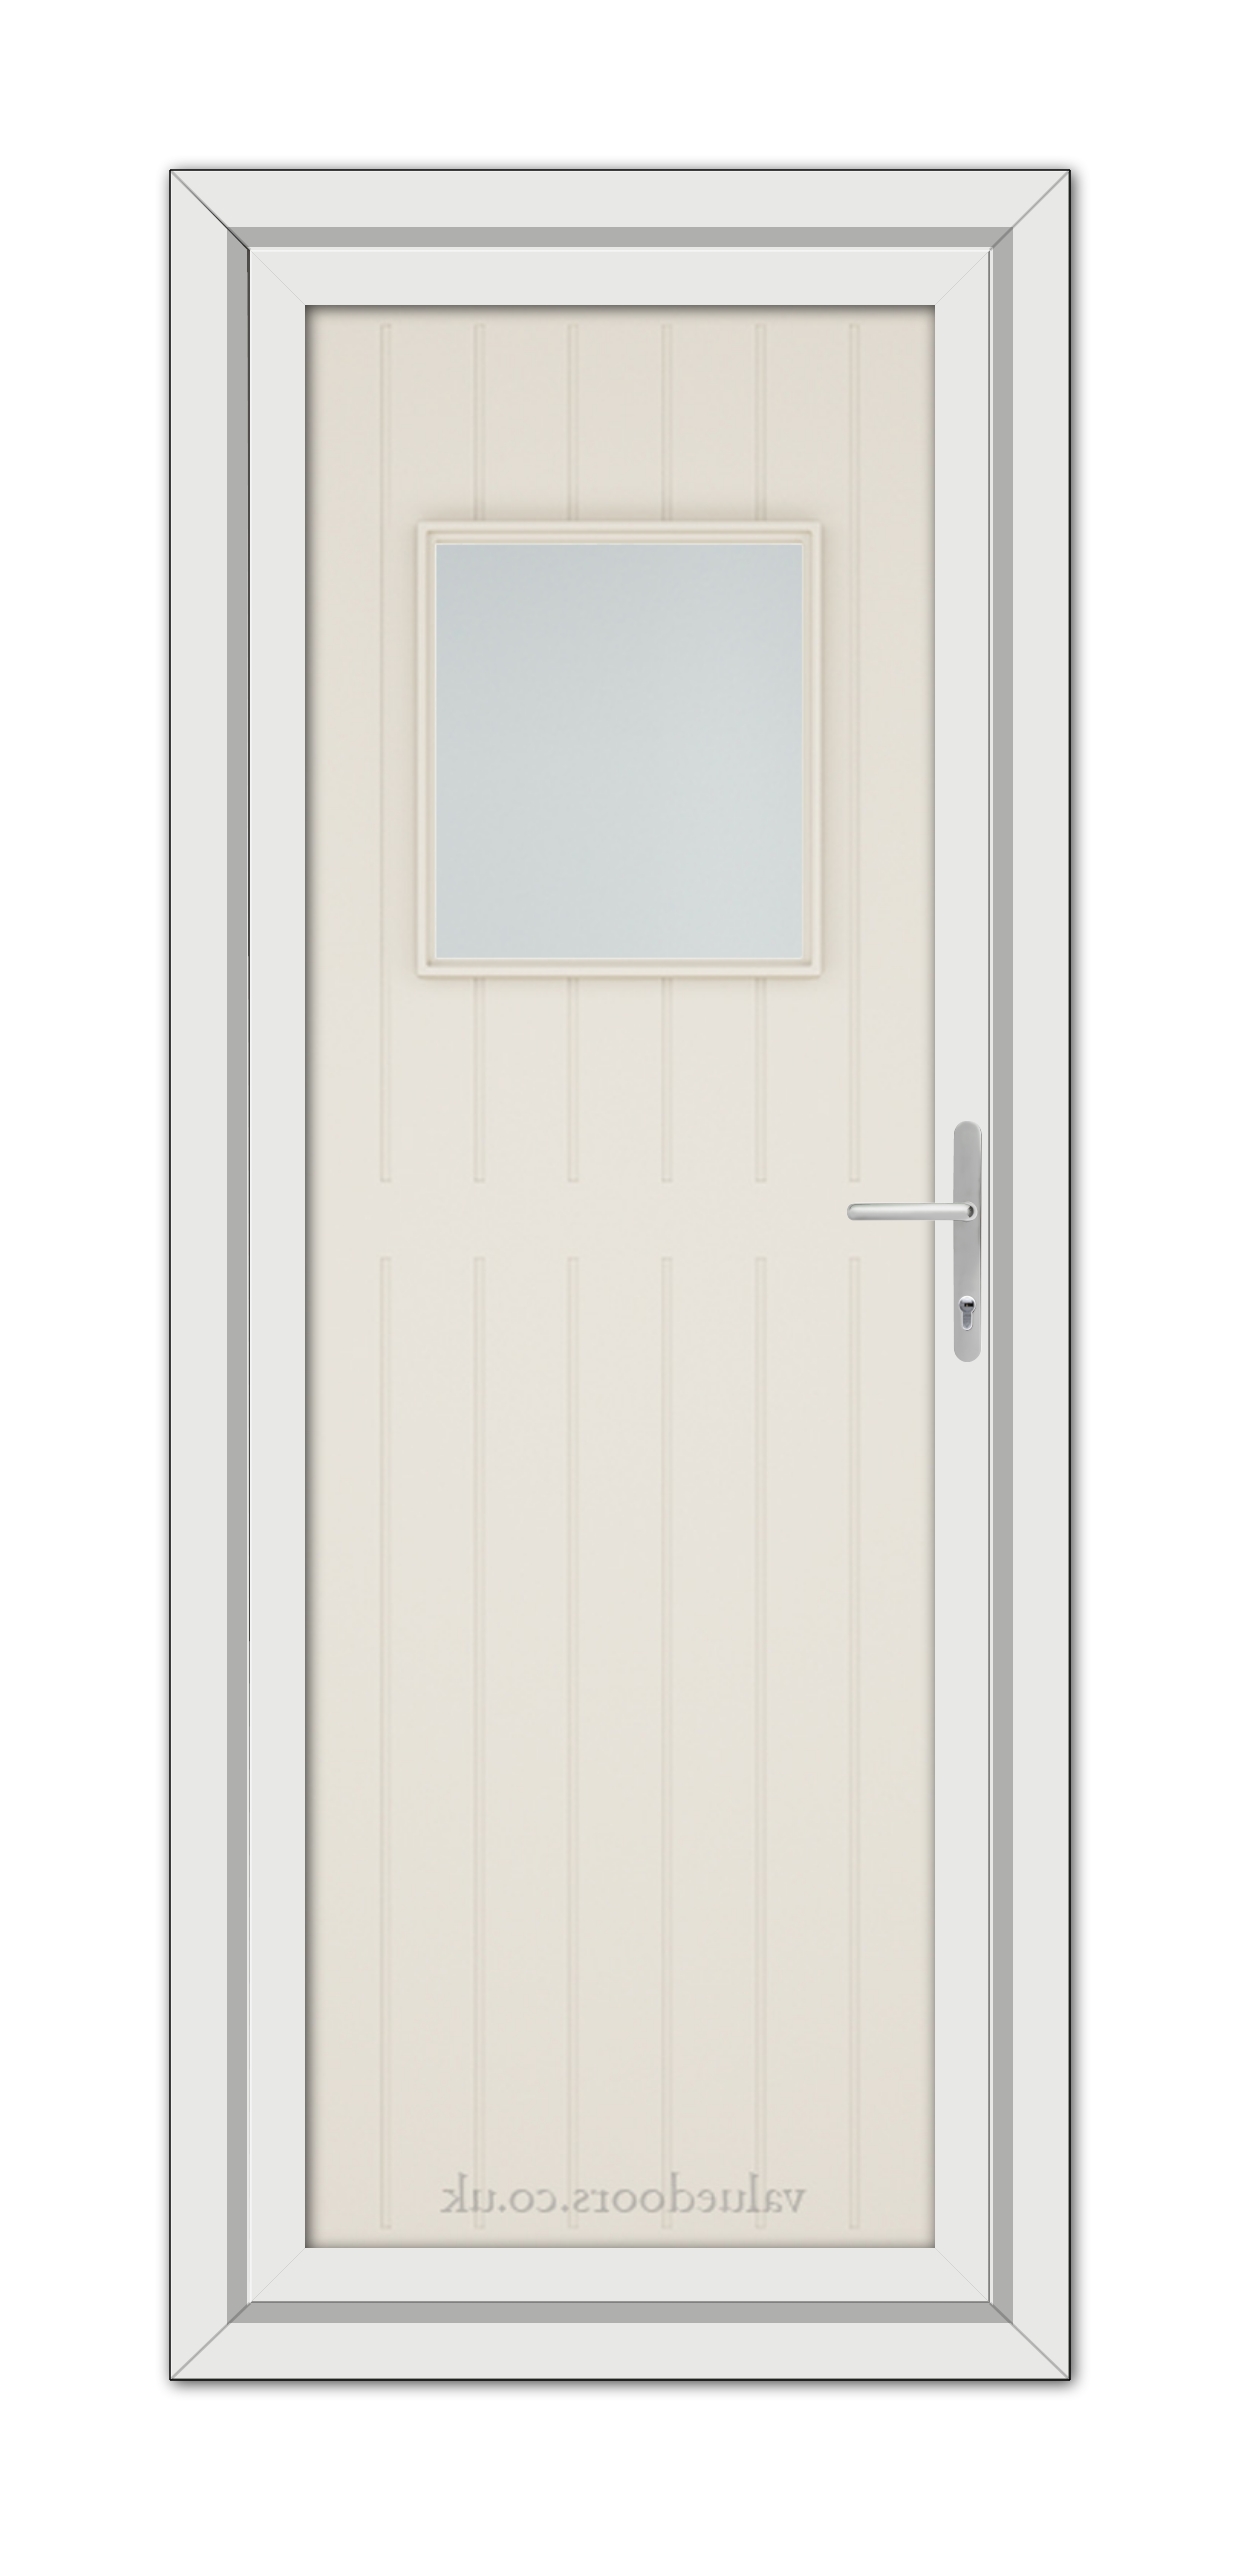 A Cream Chatsworth uPVC door featuring a small square glass window near the top and a metallic handle on the right, set within a simple frame.